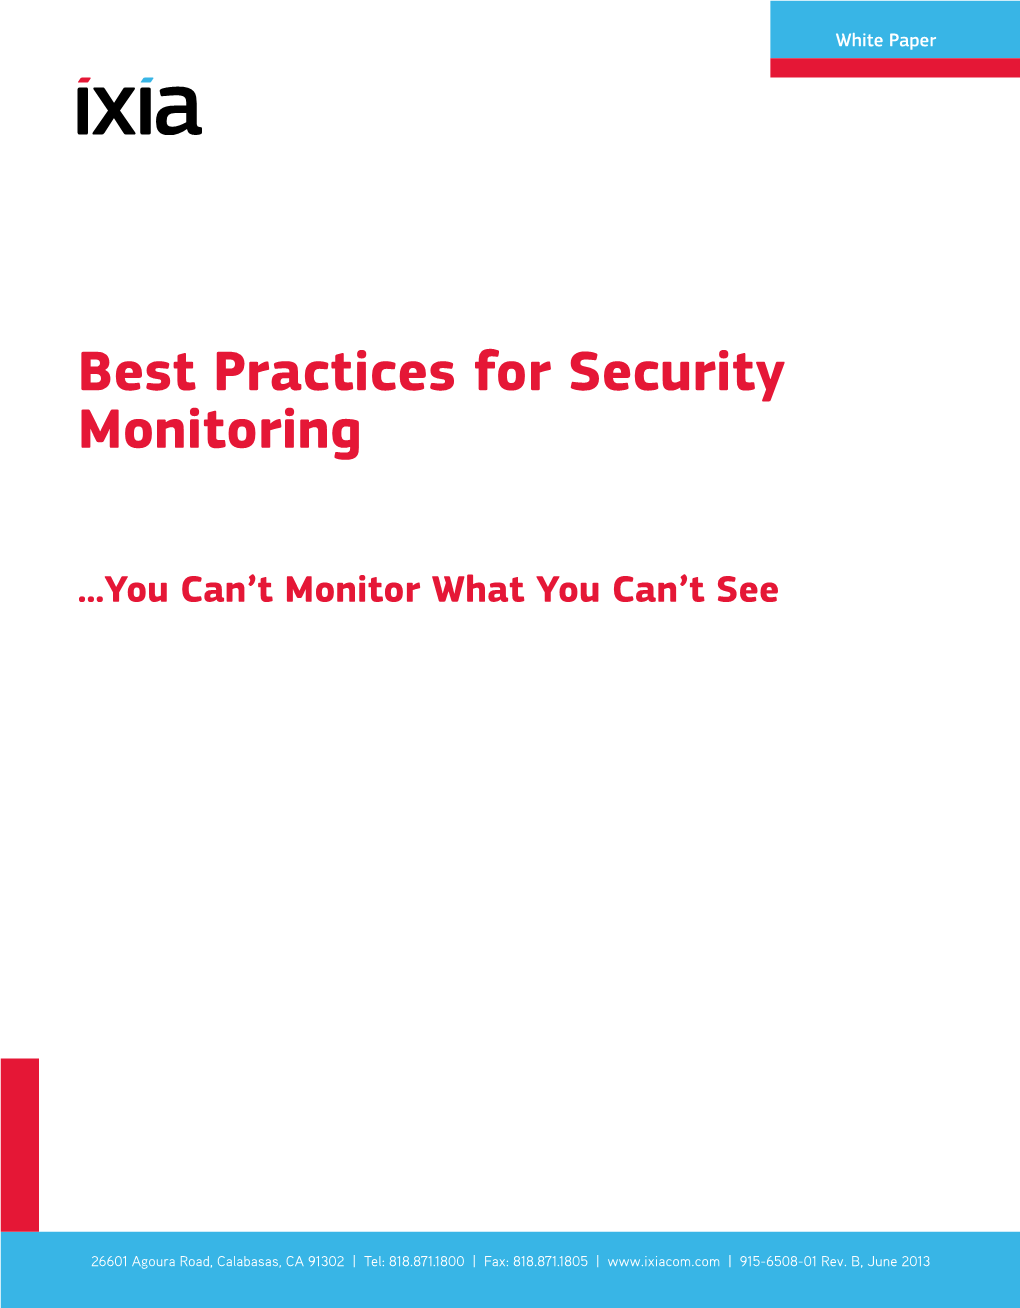 Best Practices for Security Monitoring